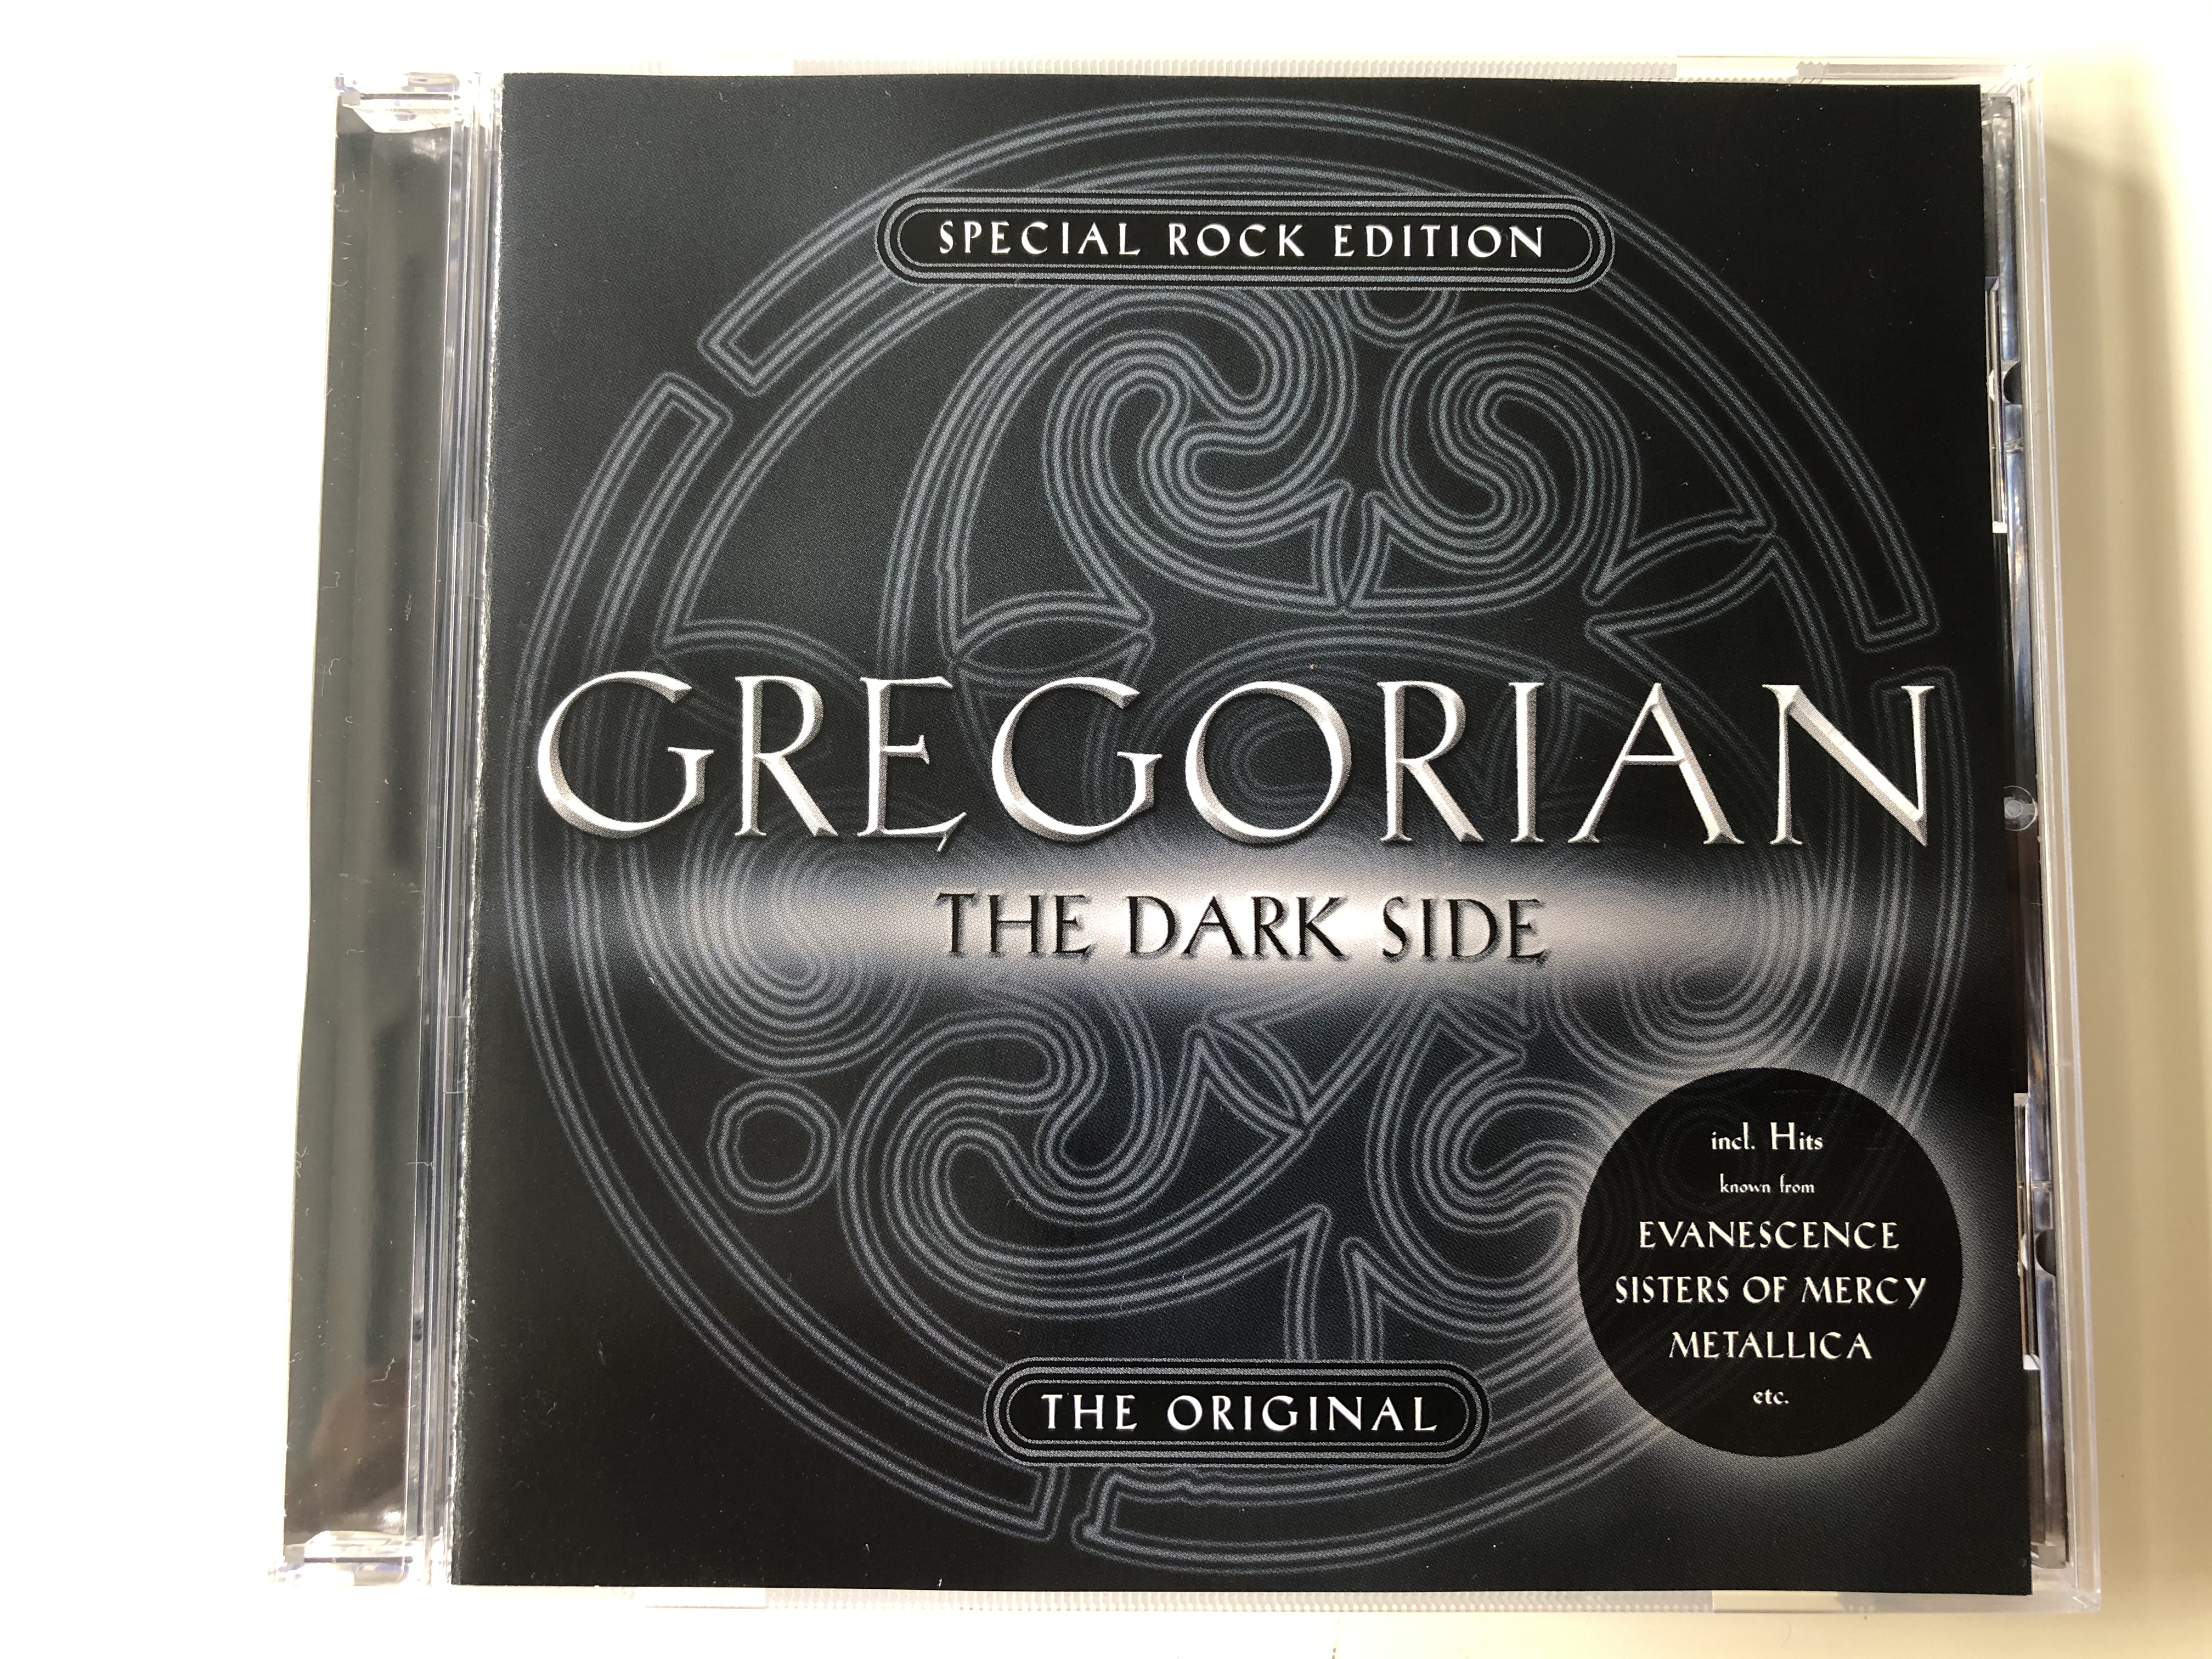 gregorian-the-dark-side-special-rock-edition-the-original-incl.-hits-known-from-evanescence-sister-of-mercy-metallica-etc.-edel-records-audio-cd-2004-0158752ere-1-.jpg